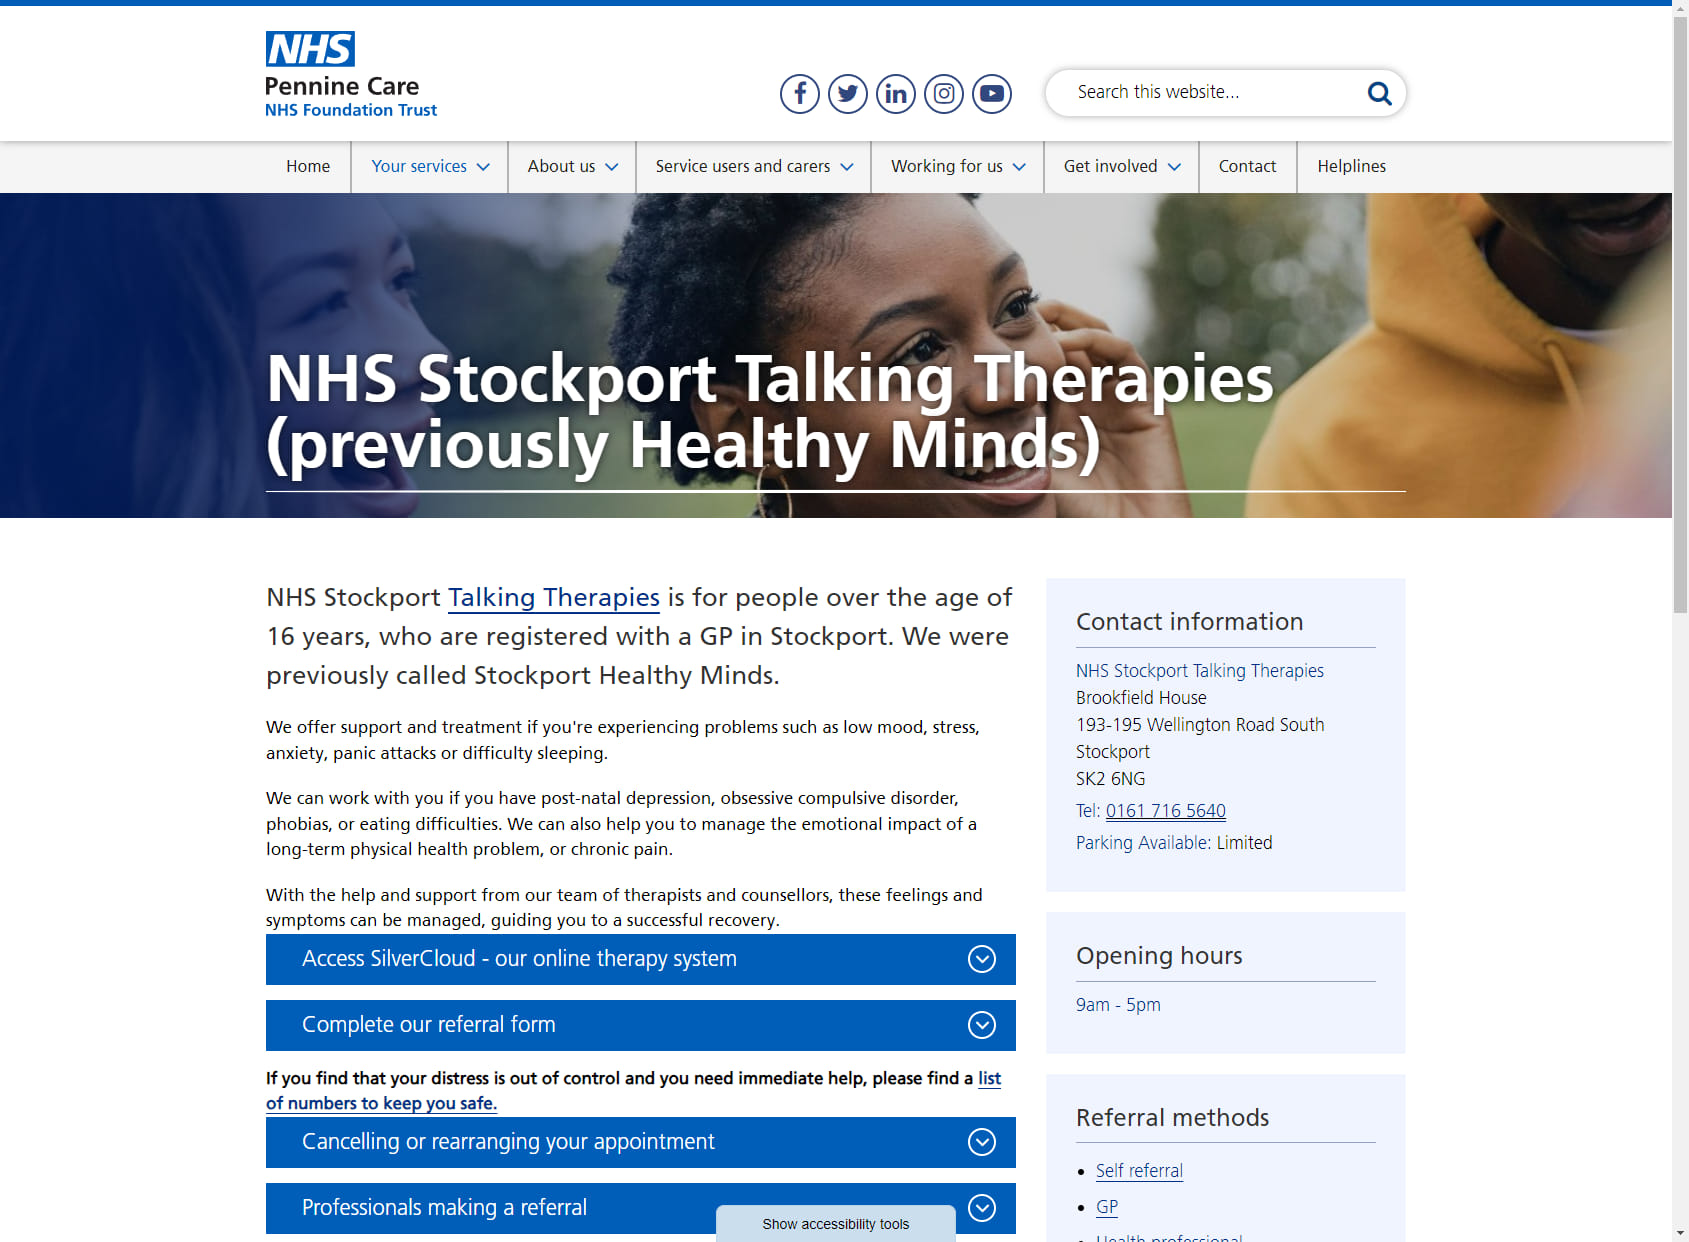 NHS Stockport Talking Therapies (formerly Stockport Healthy Minds)